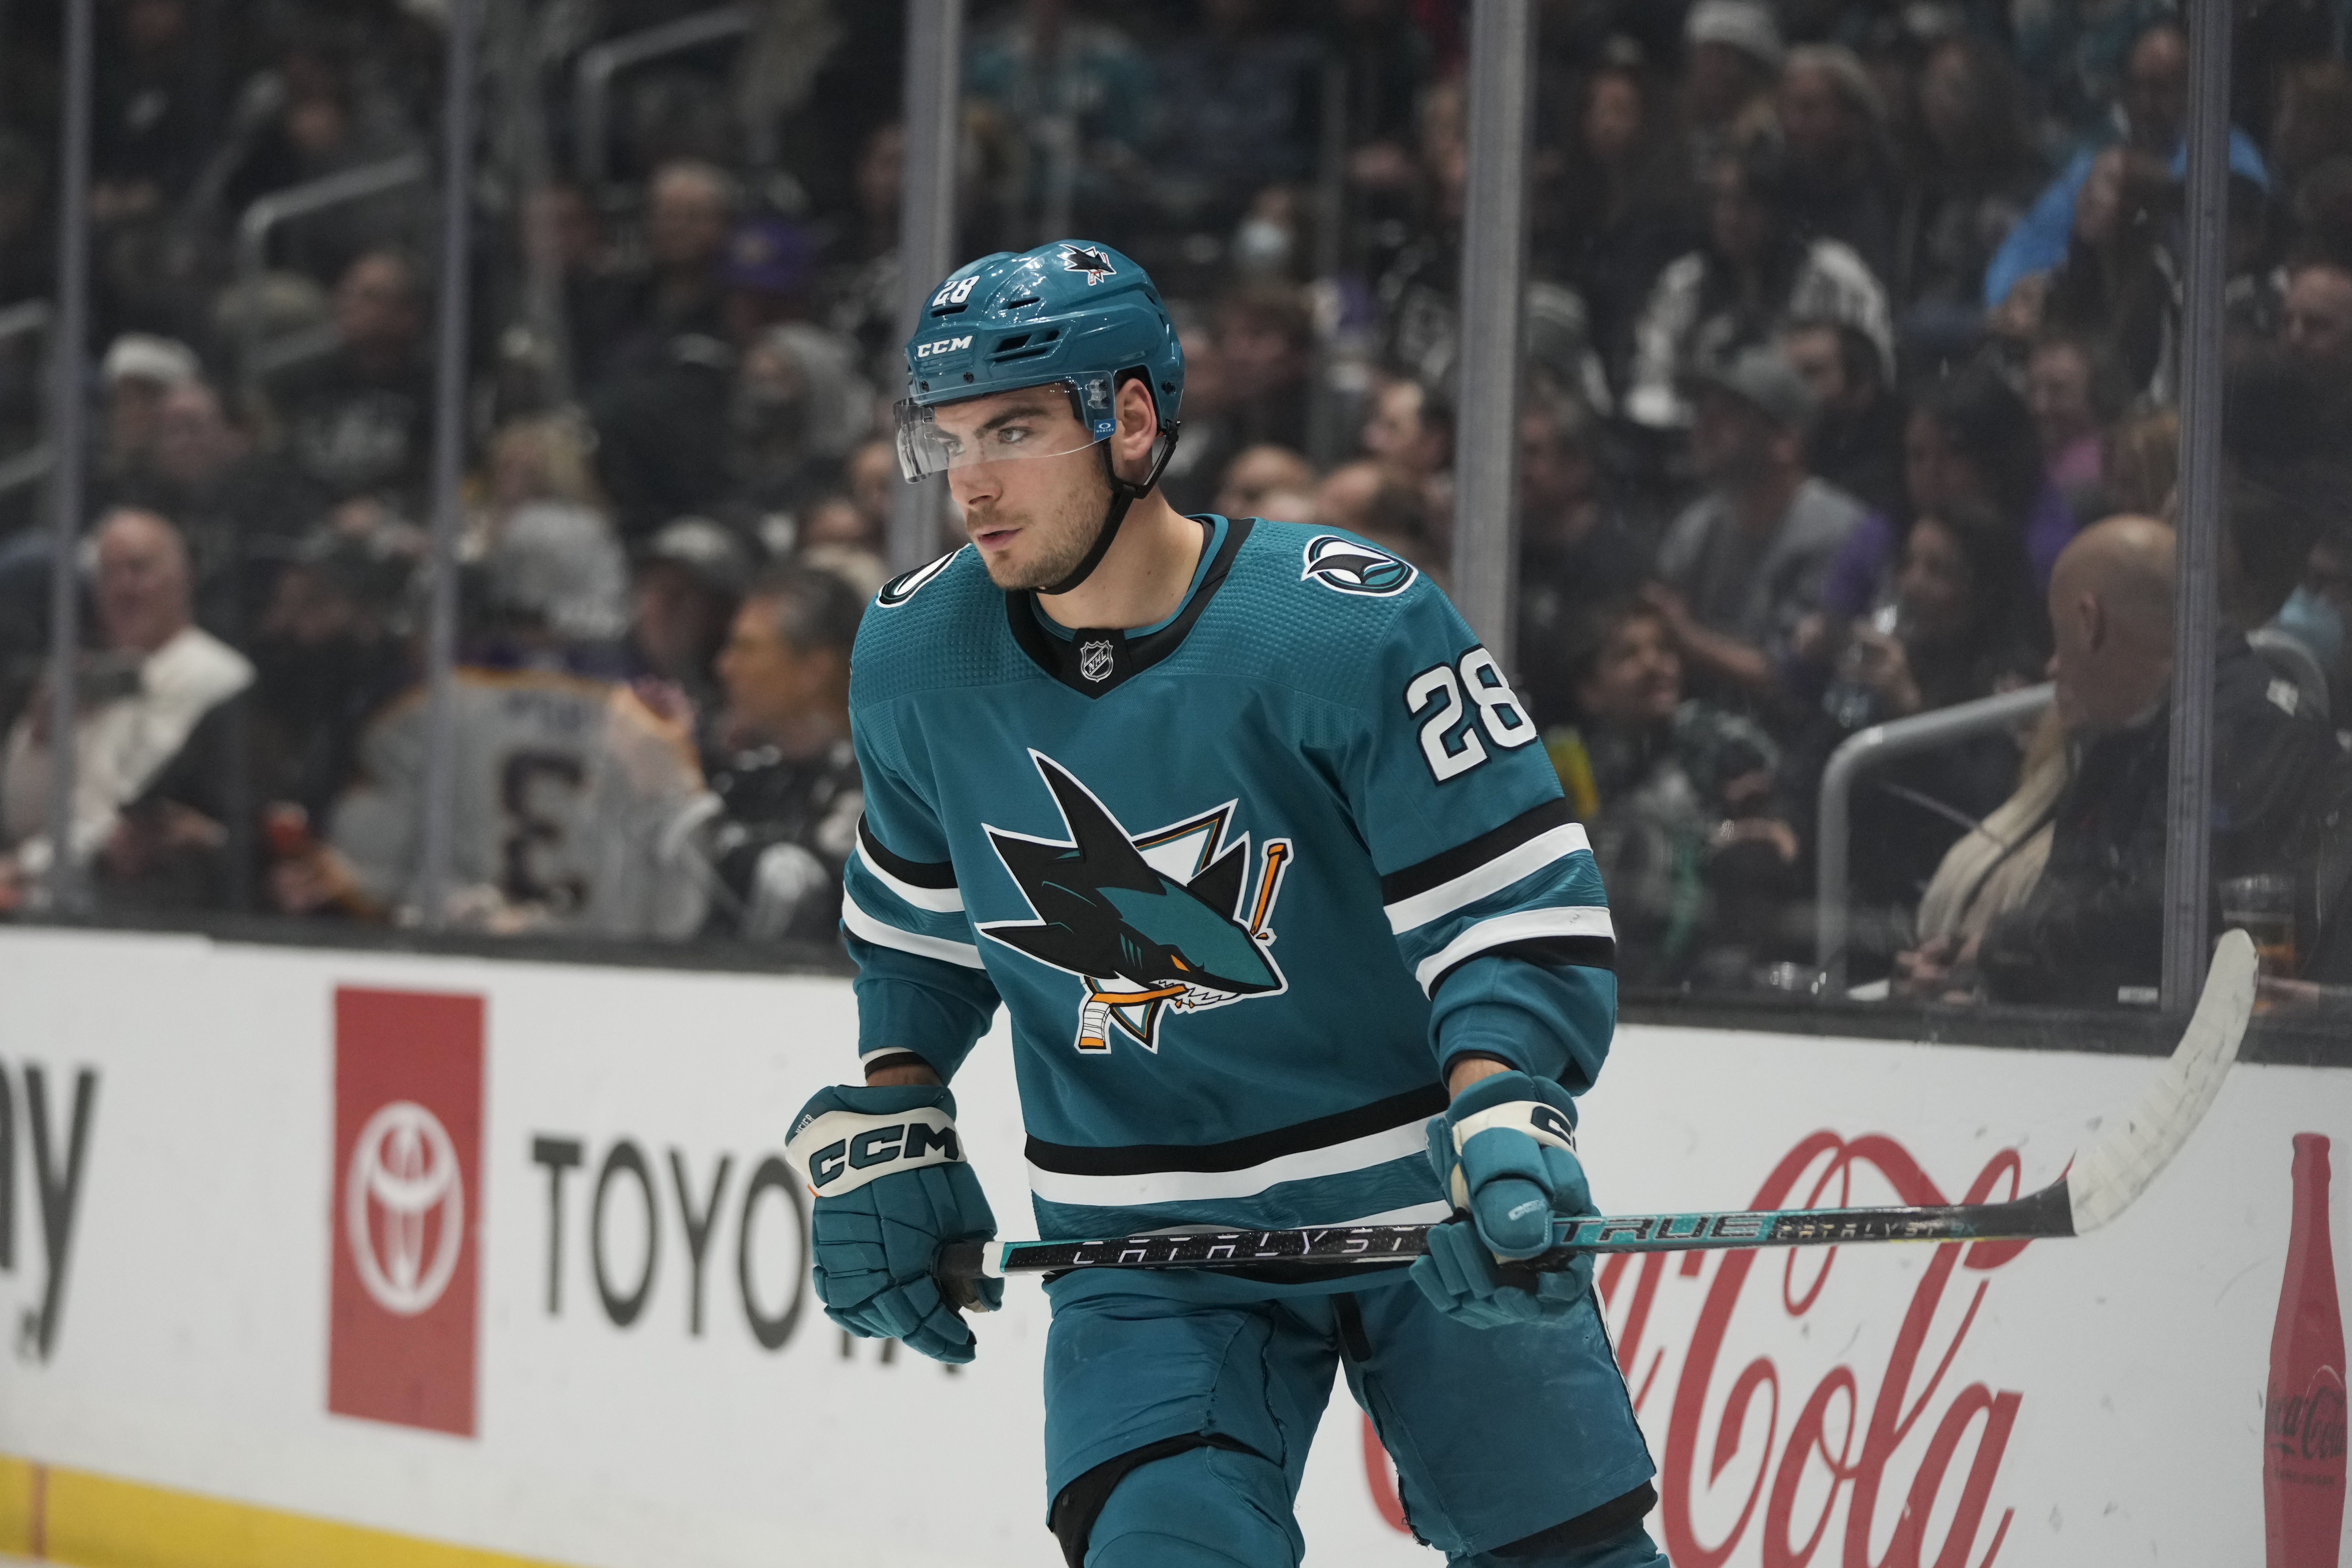 Can Timo Meier Become a Superstar?